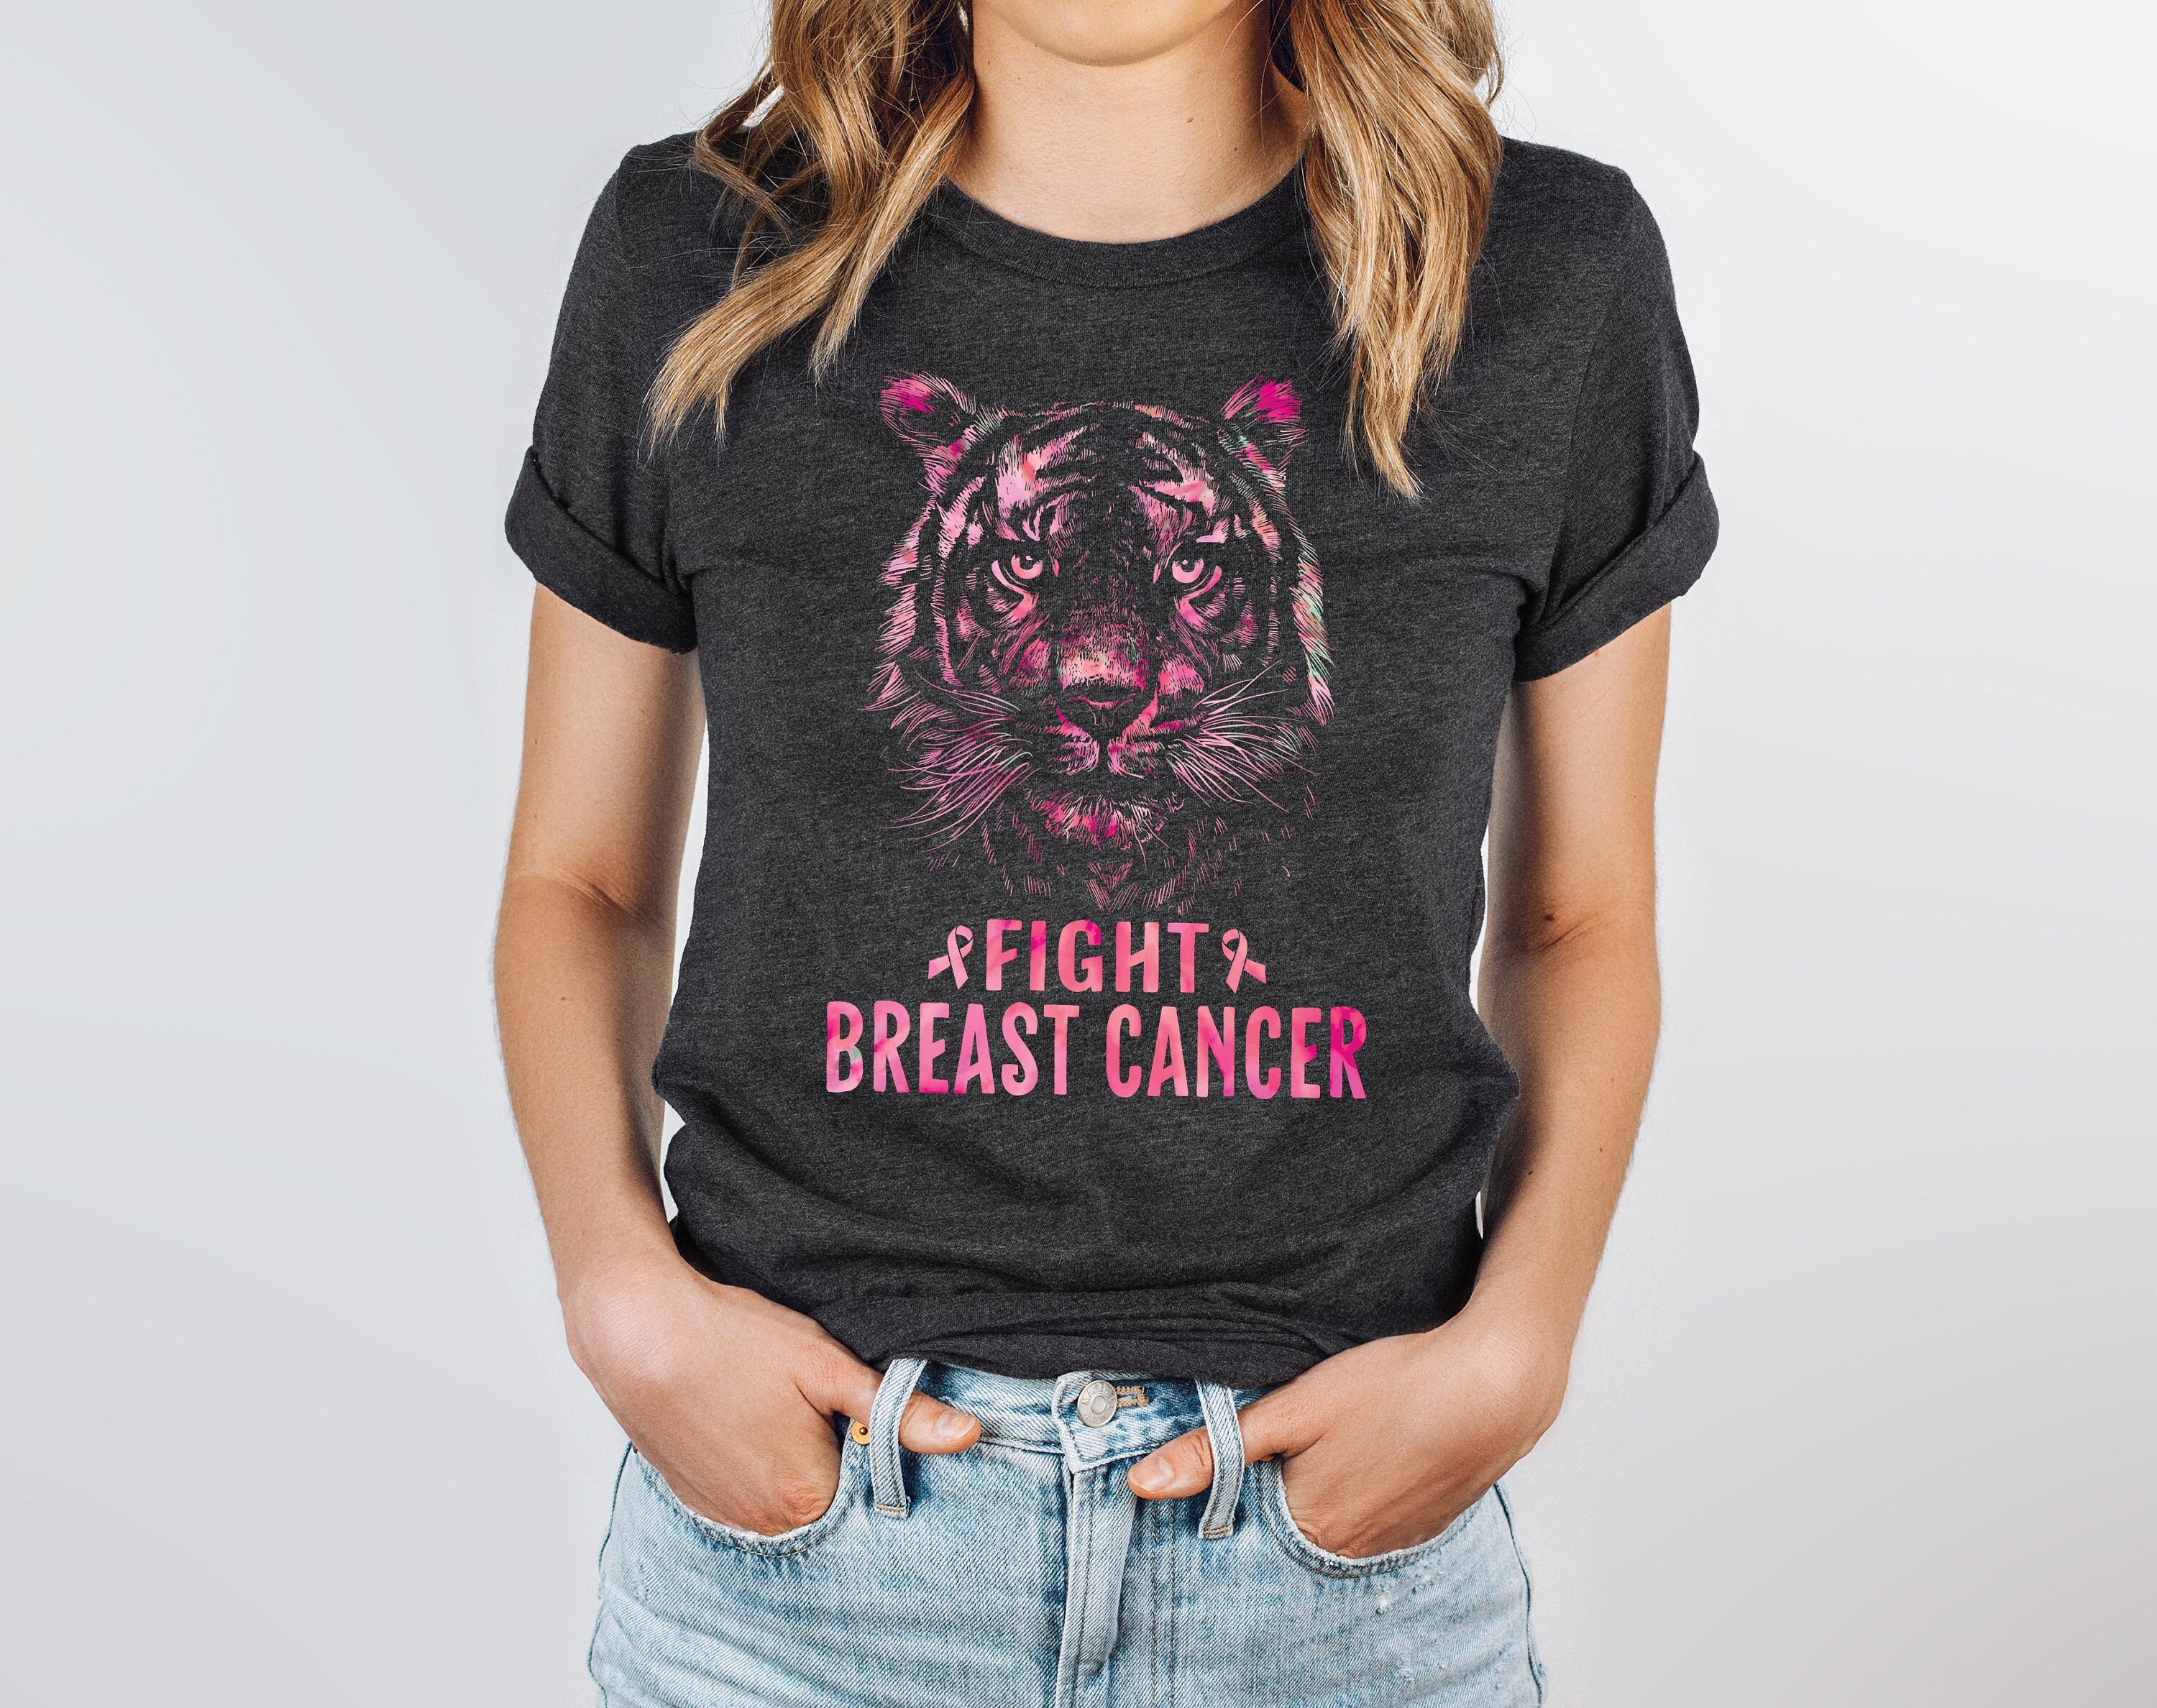 Detroit Tigers Mlb Special Design I Pink I Can! Fearless Against Breast  Cancer - Growkoc